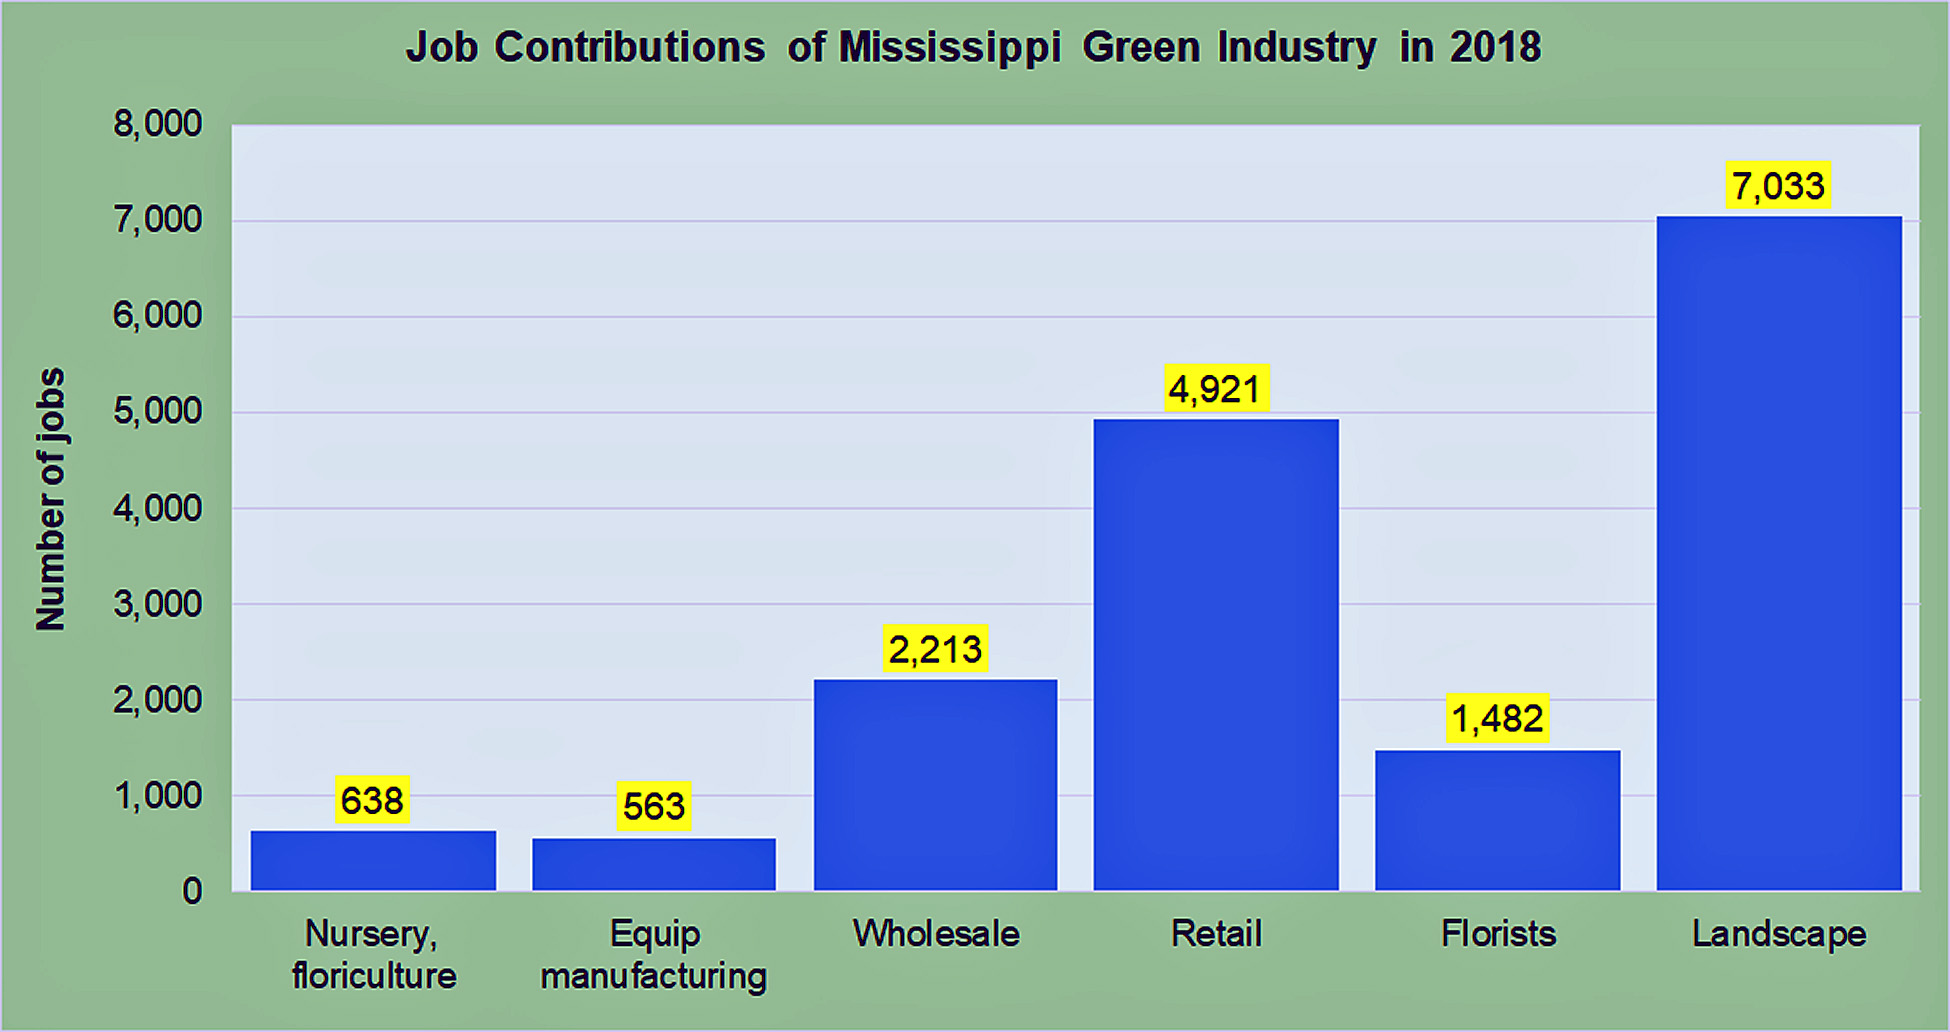 Job Contributions of Mississippi Green Industry in 2018